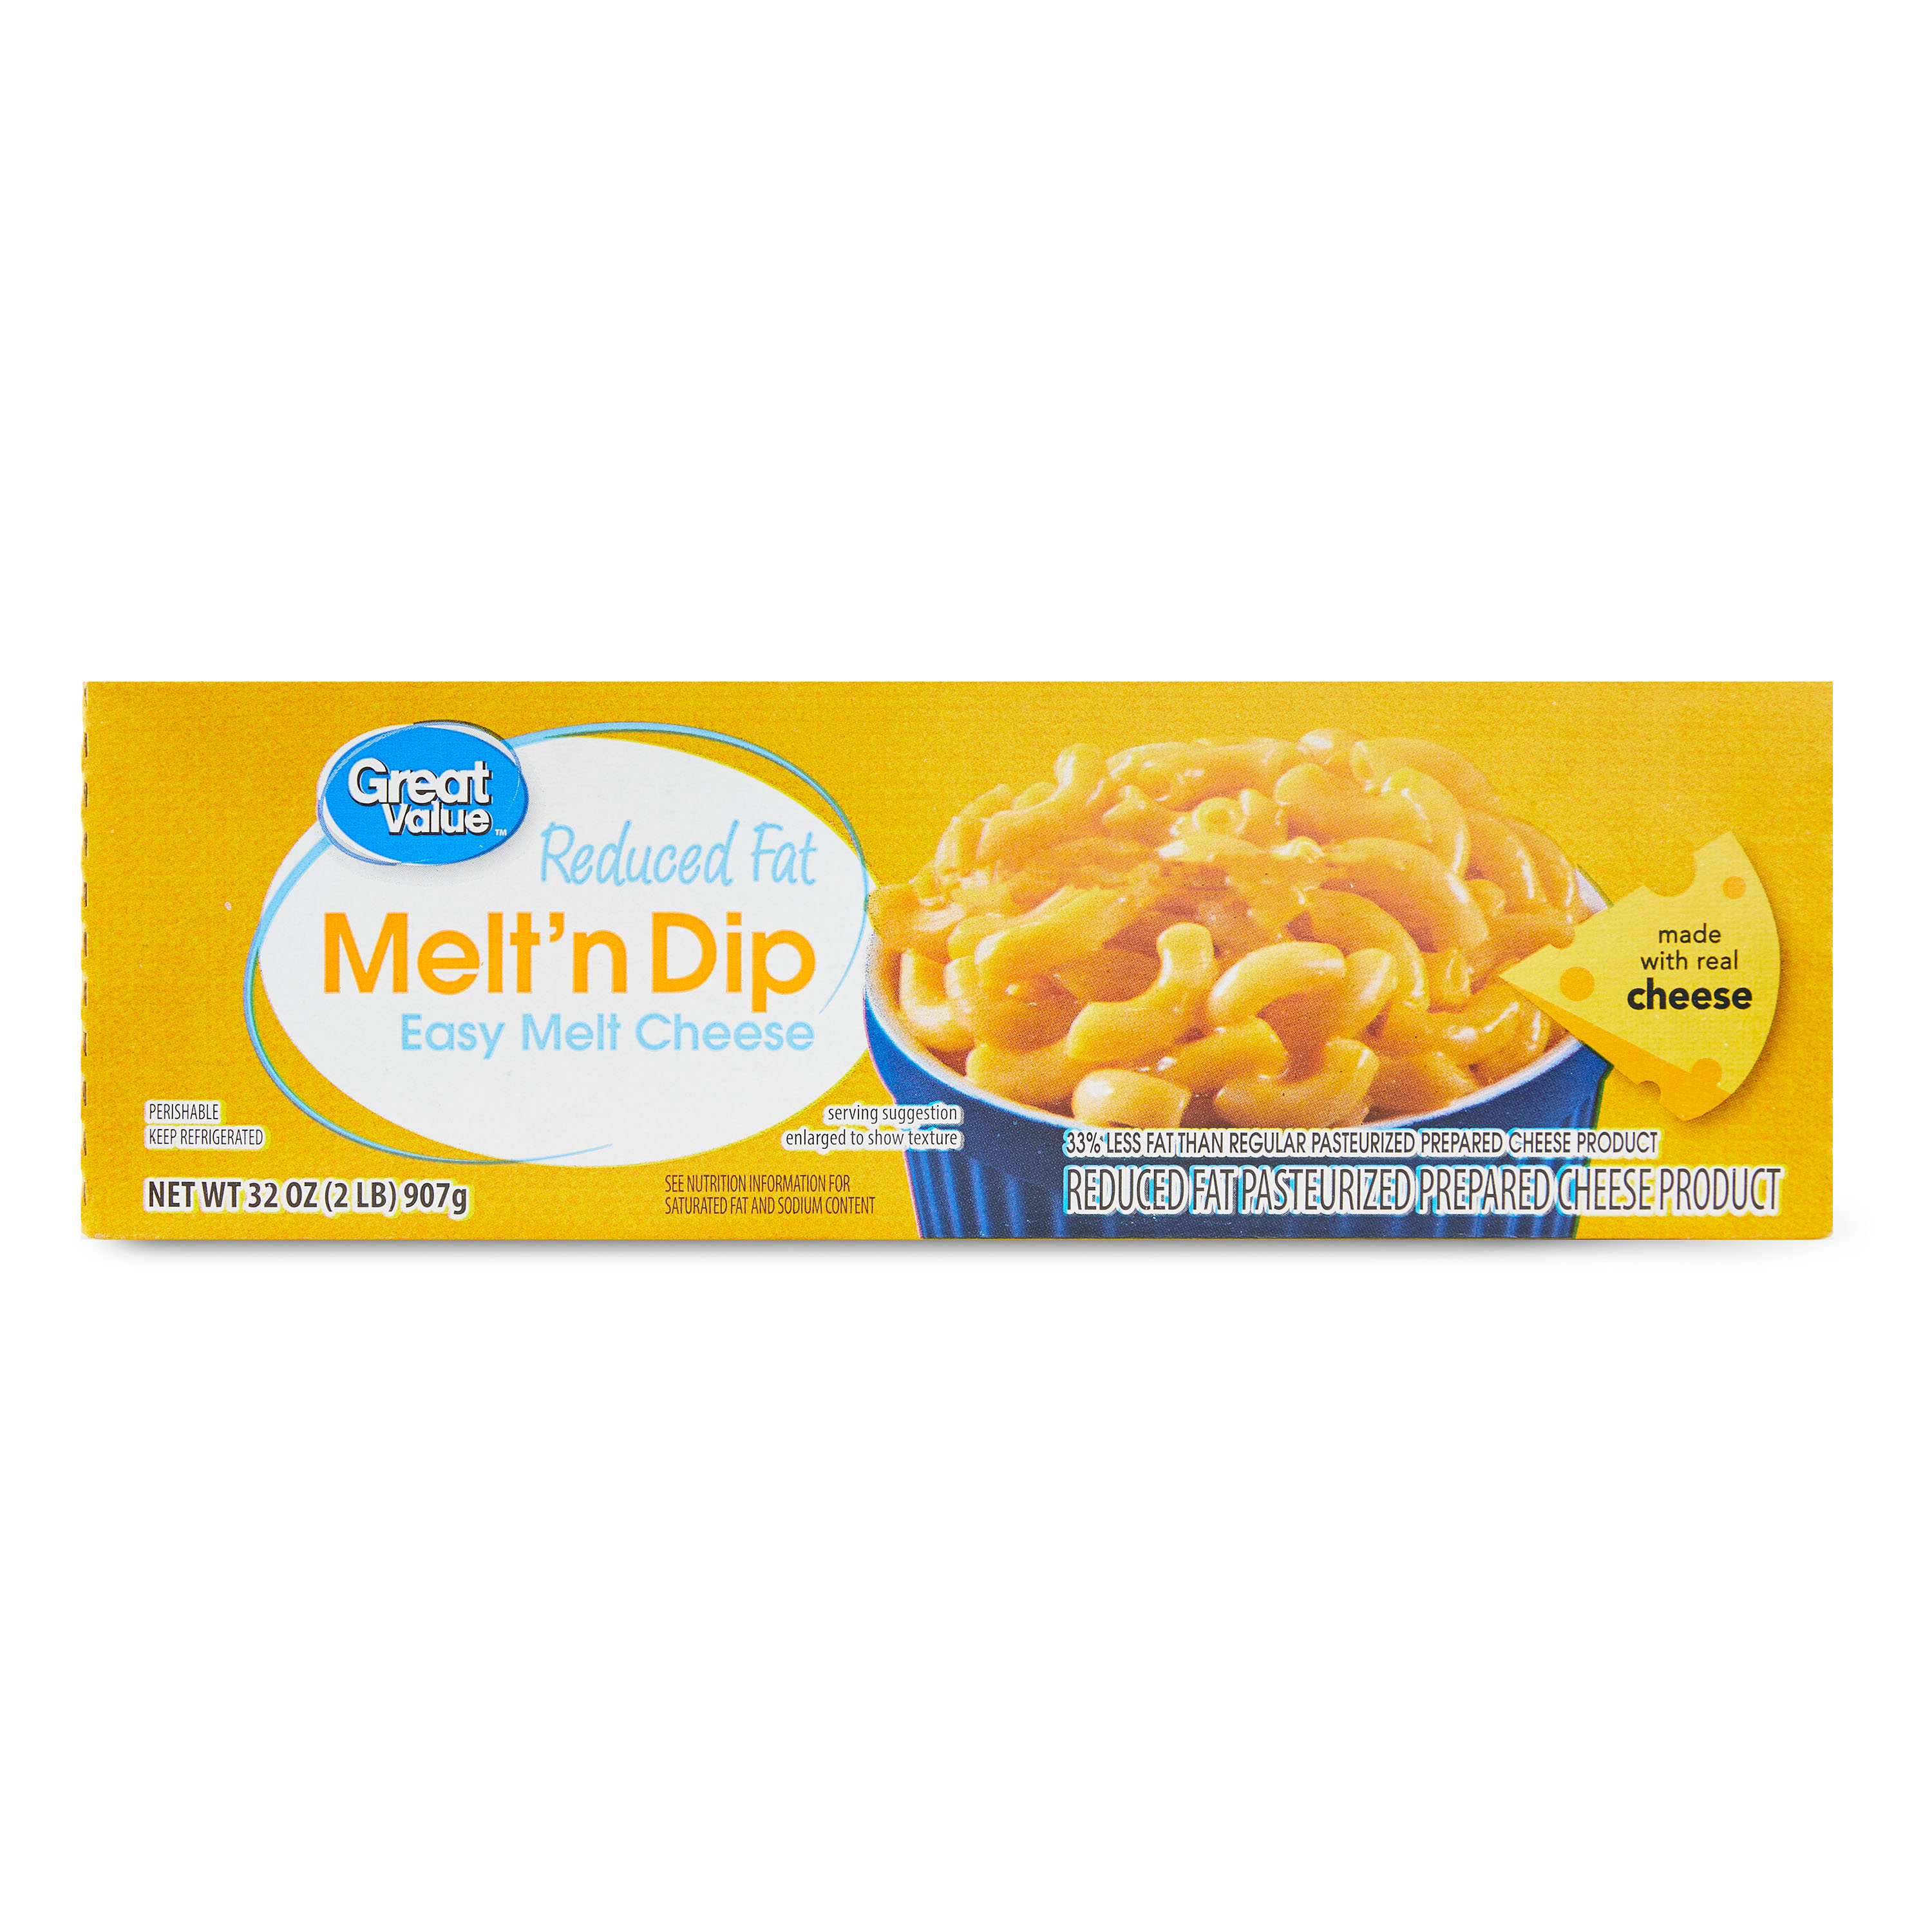 Great Value Reduced Fat Melt'n Dip Easy Melt Cheese, 32 oz - image 1 of 8